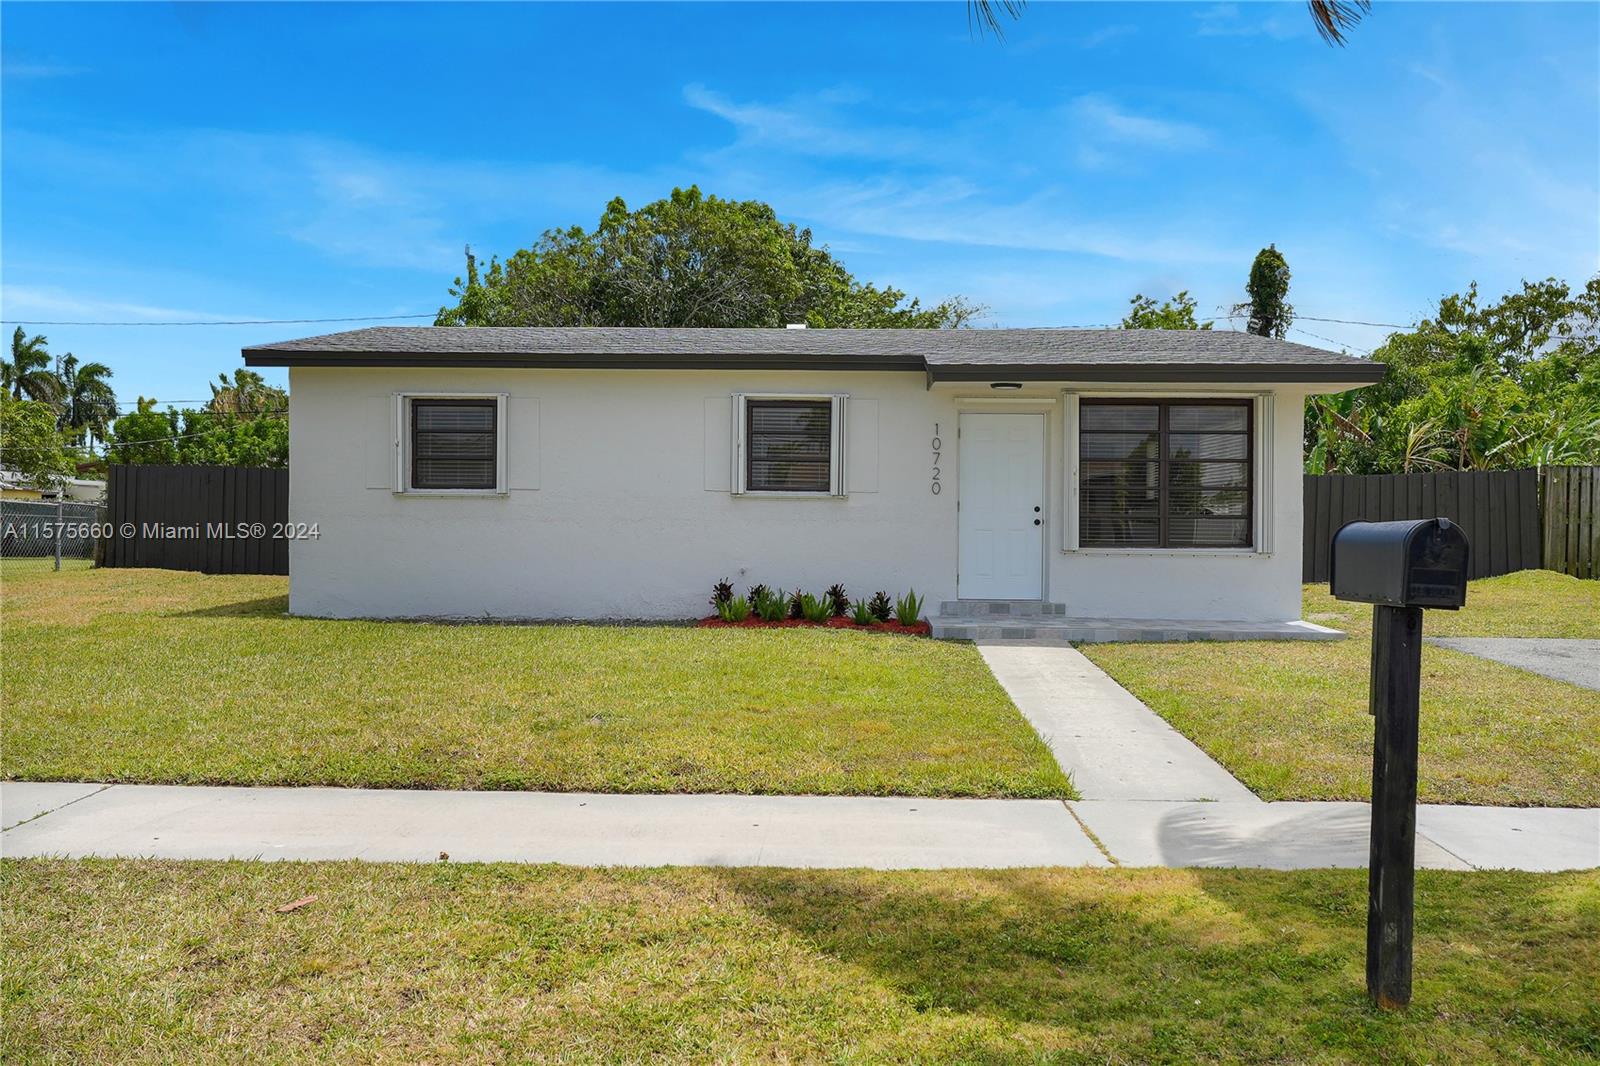 10720 SW 147th St, Miami, Florida 33176, 3 Bedrooms Bedrooms, ,1 BathroomBathrooms,Residential,For Sale,10720 SW 147th St,A11575660